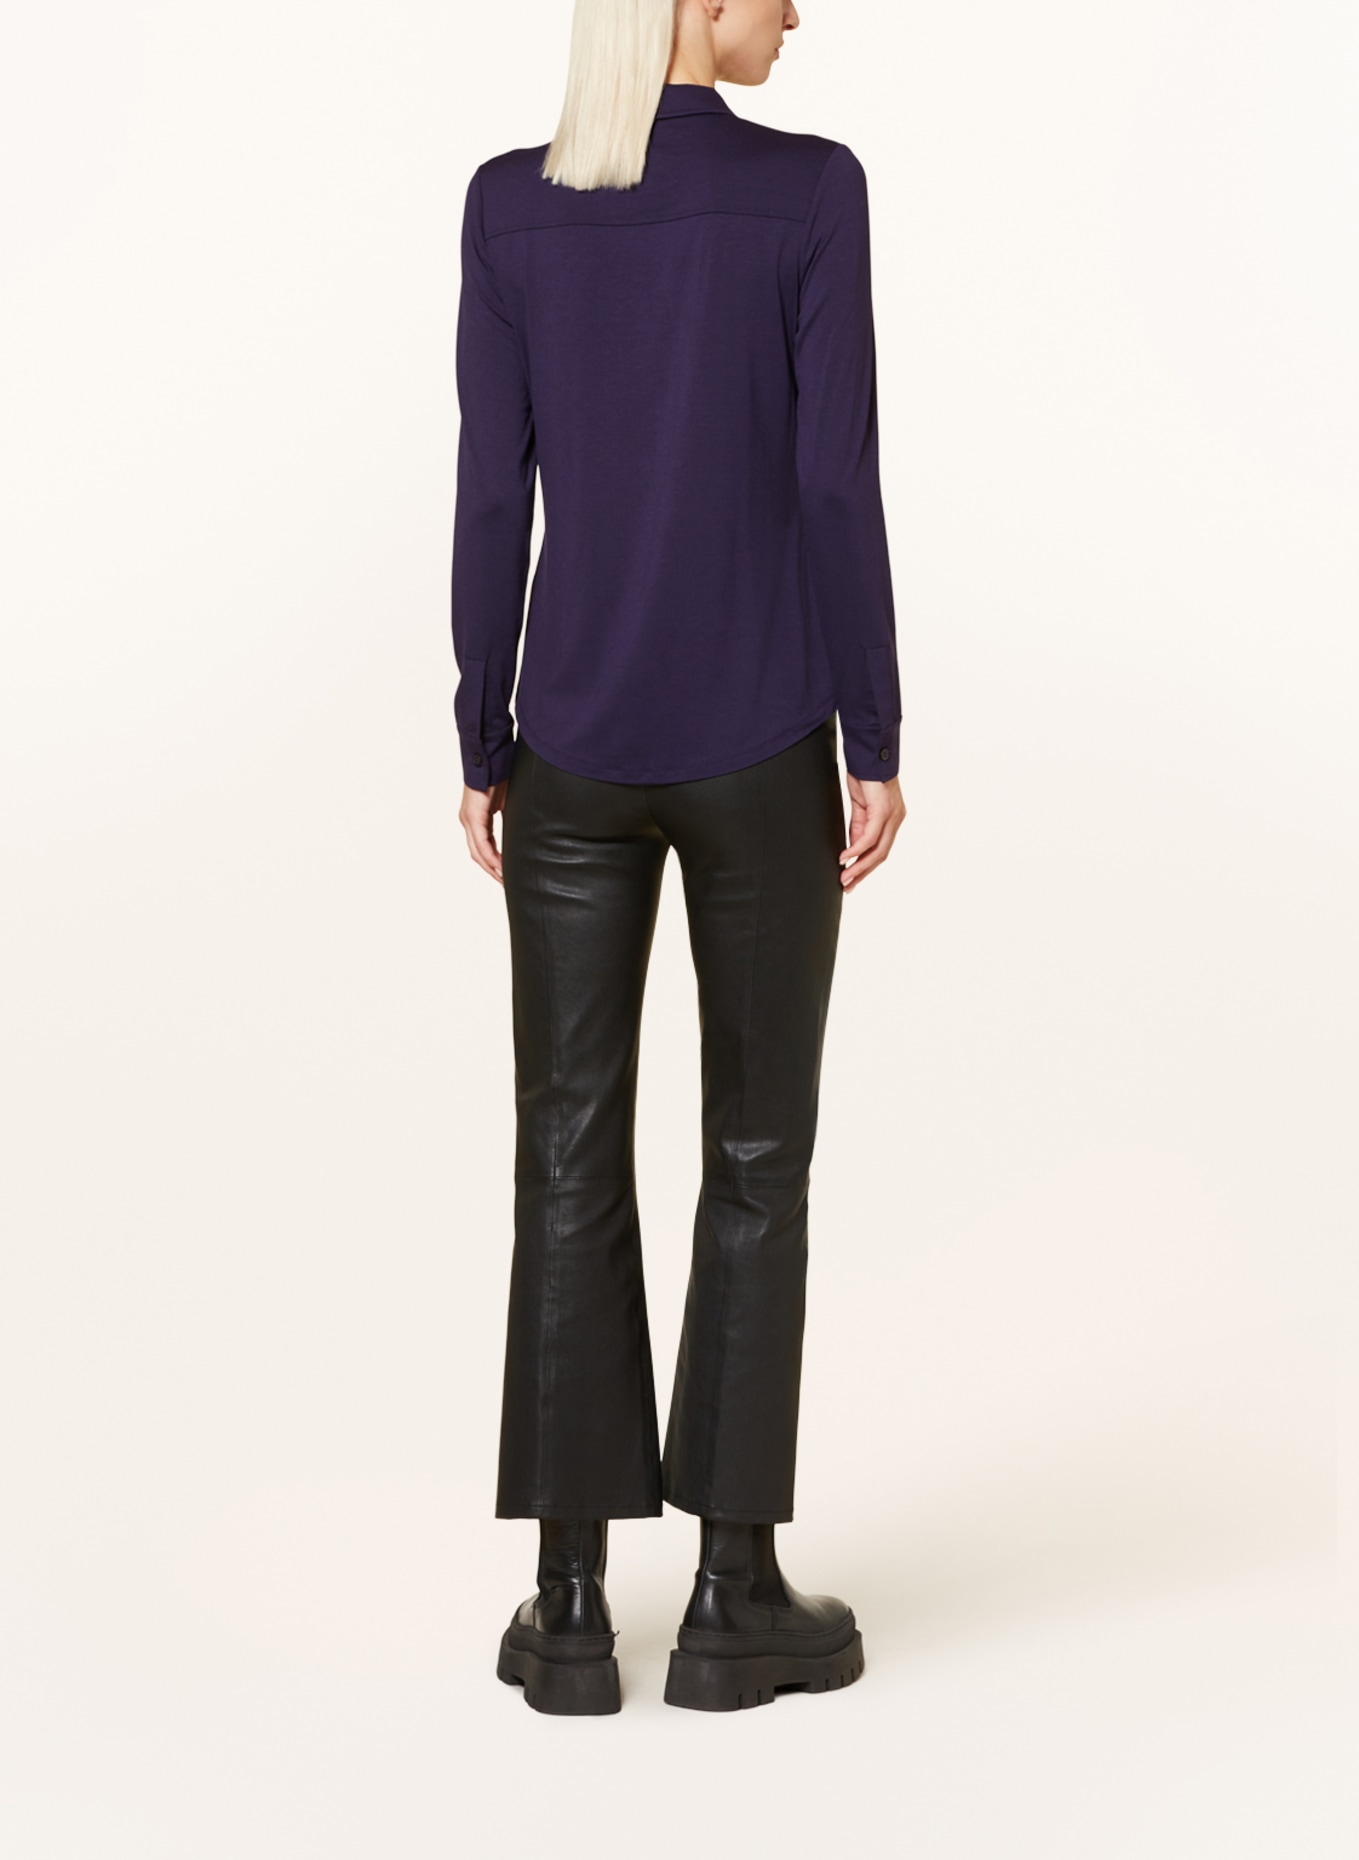 Marc O'Polo Shirt blouse made of jersey, Color: DARK PURPLE (Image 3)